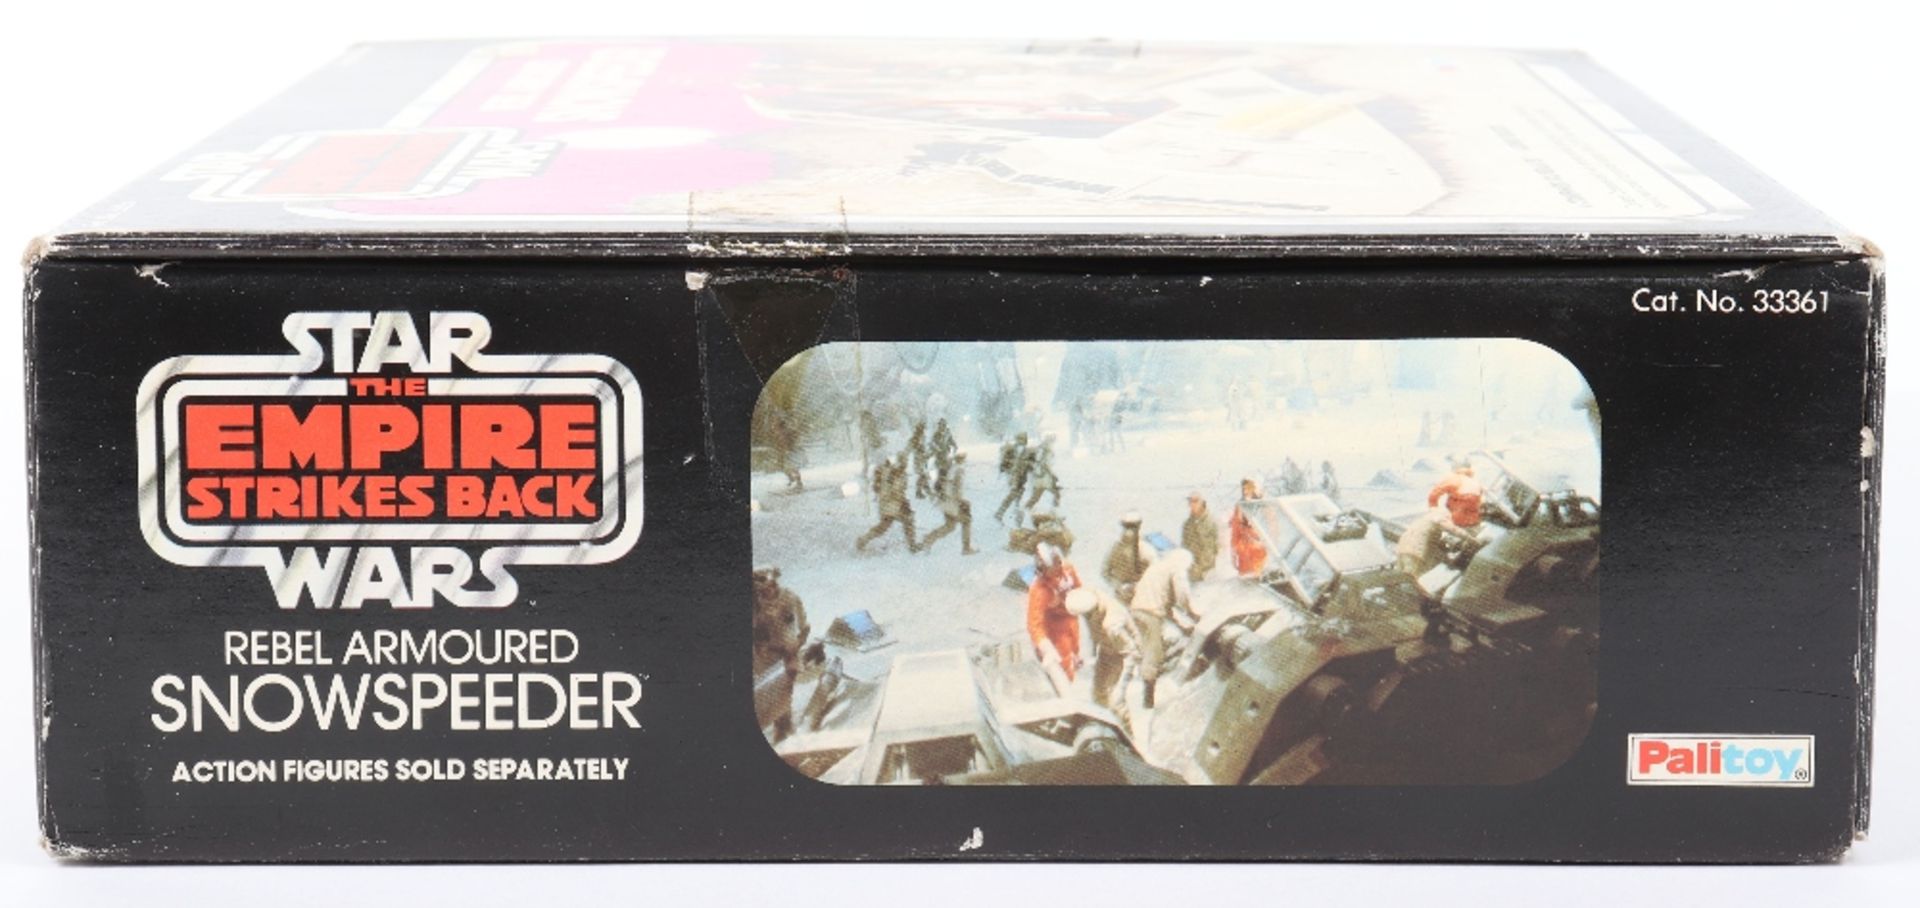 Boxed Palitoy Star Wars The Empire Strikes Back Rebel Armoured Snowspeeder - Image 9 of 11